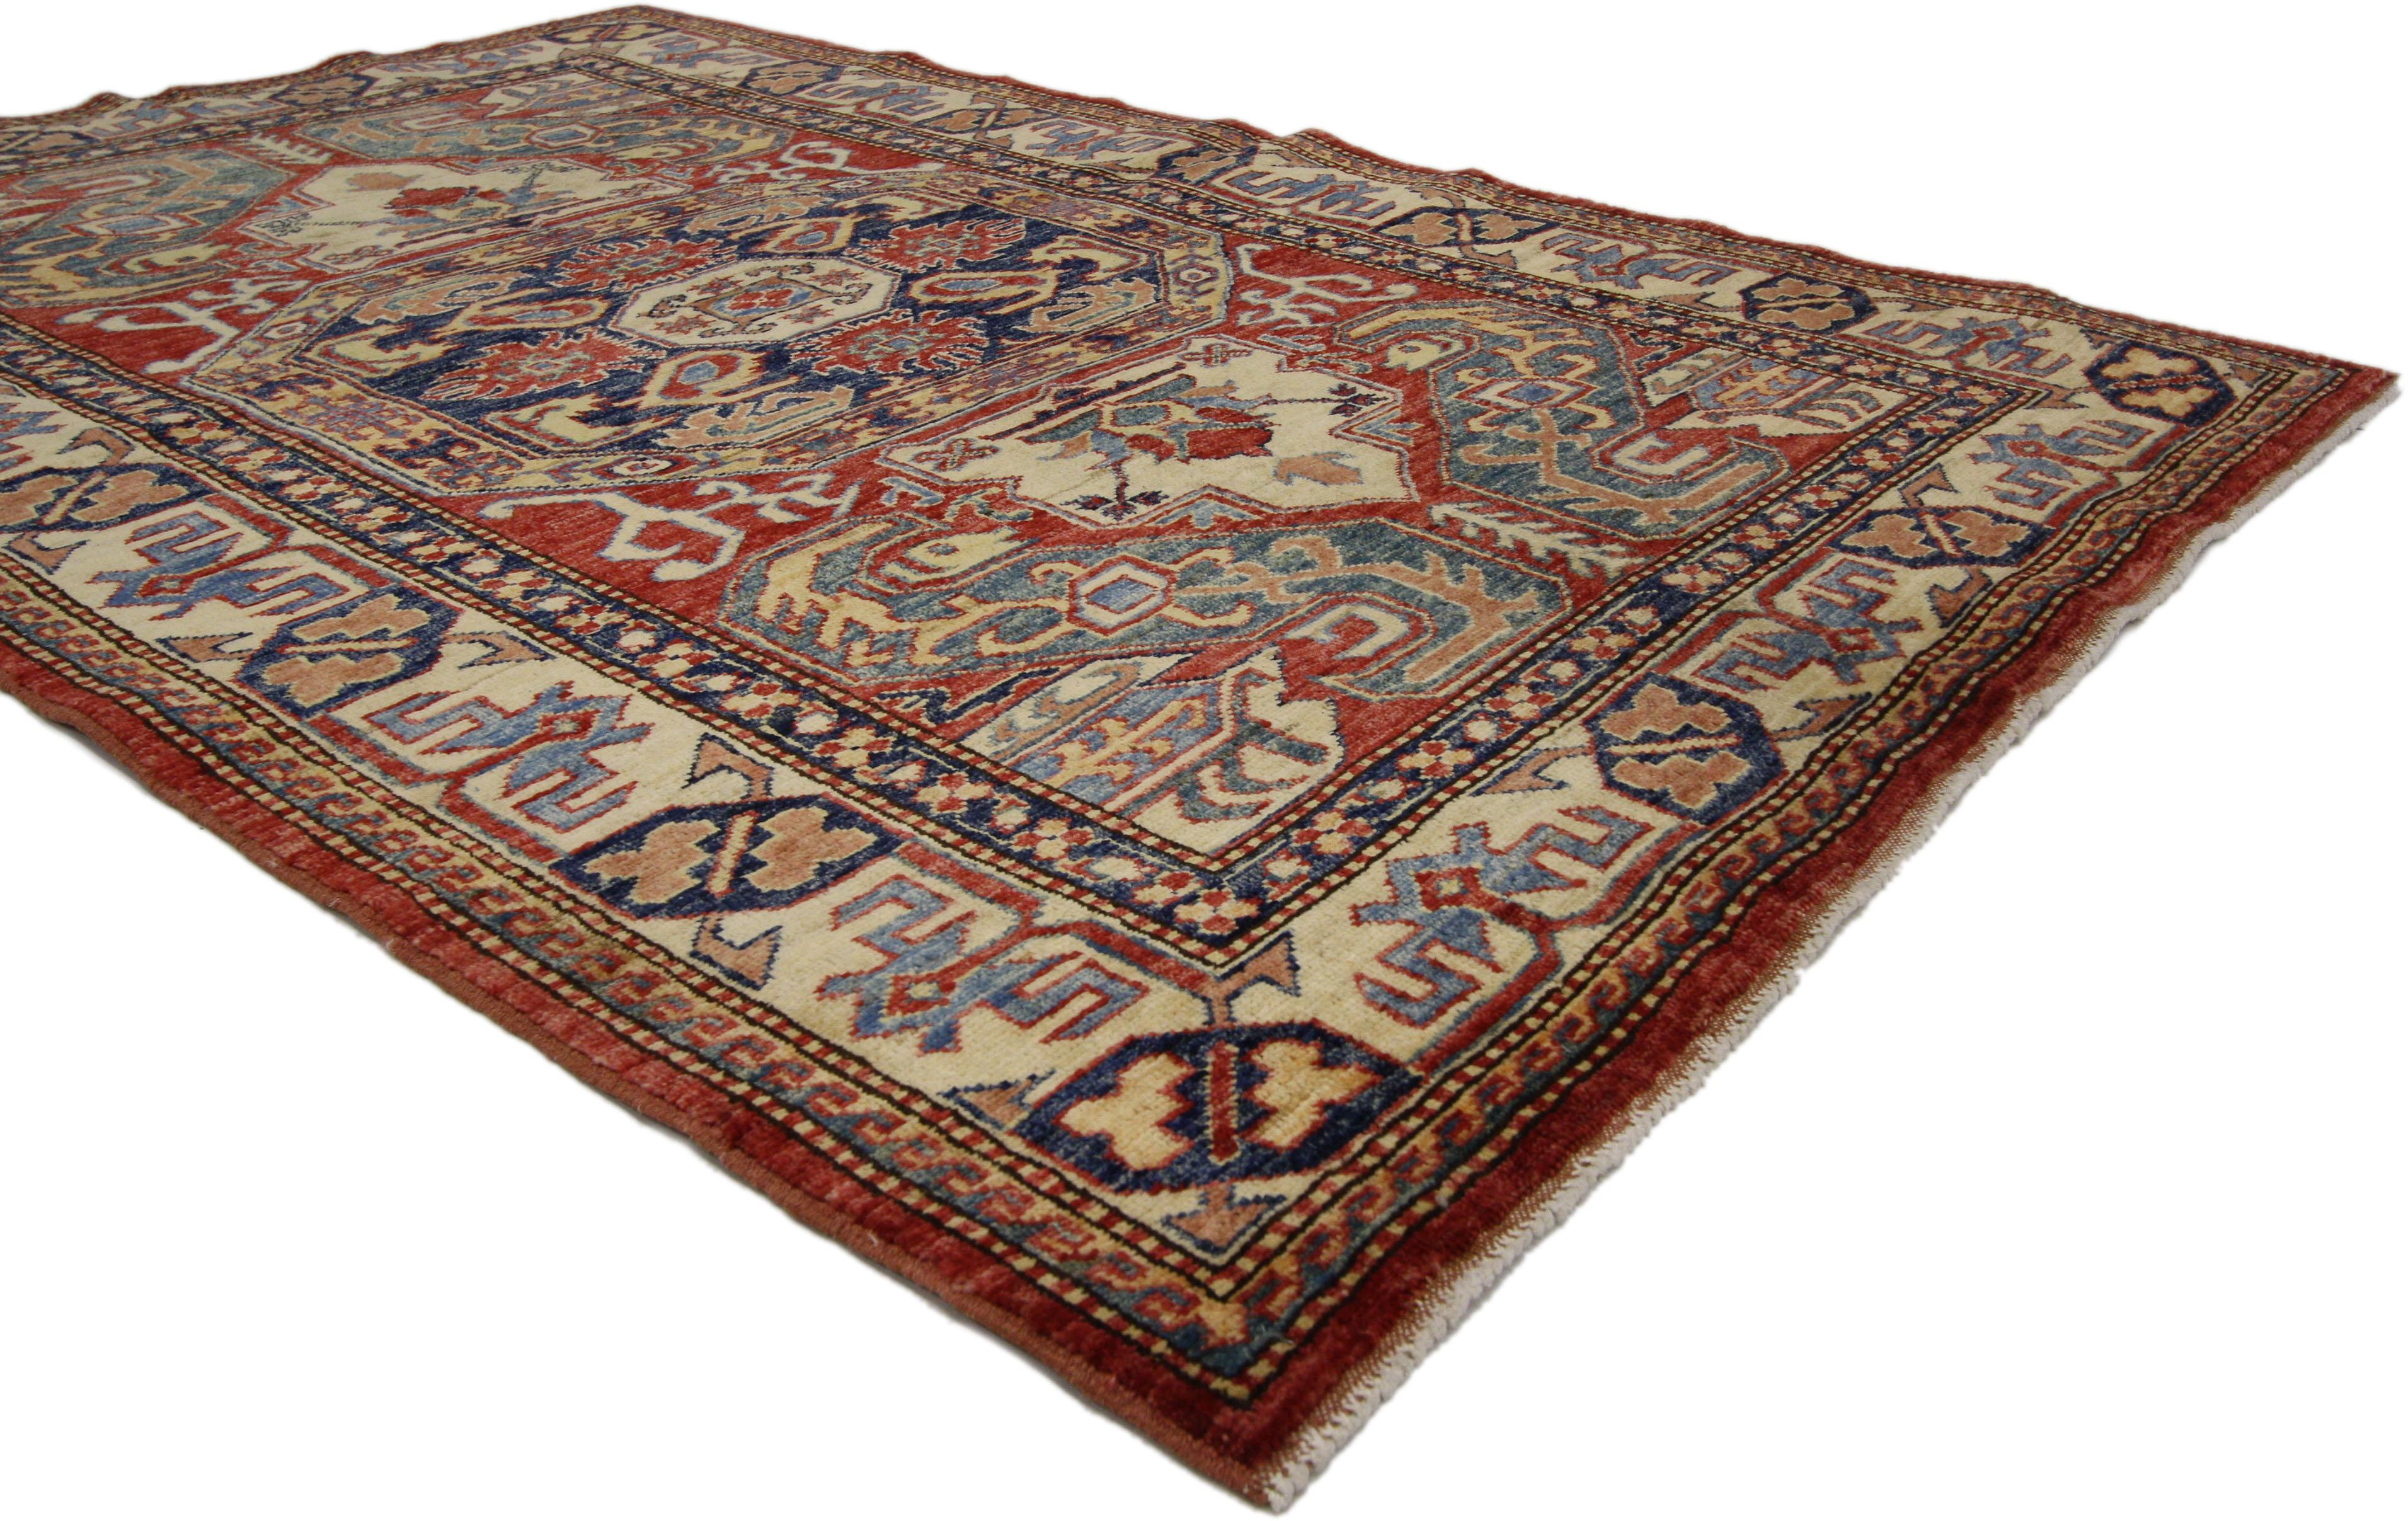  ​74236 Vintage Turkish Oushak Rug with Modern Tribal Style 03'11 x 05'09. This vintage Turkish Oushak rug features a modern traditional style. Immersed in Anatolian history and refined colors, this vintage Oushak rug combines simplicity with